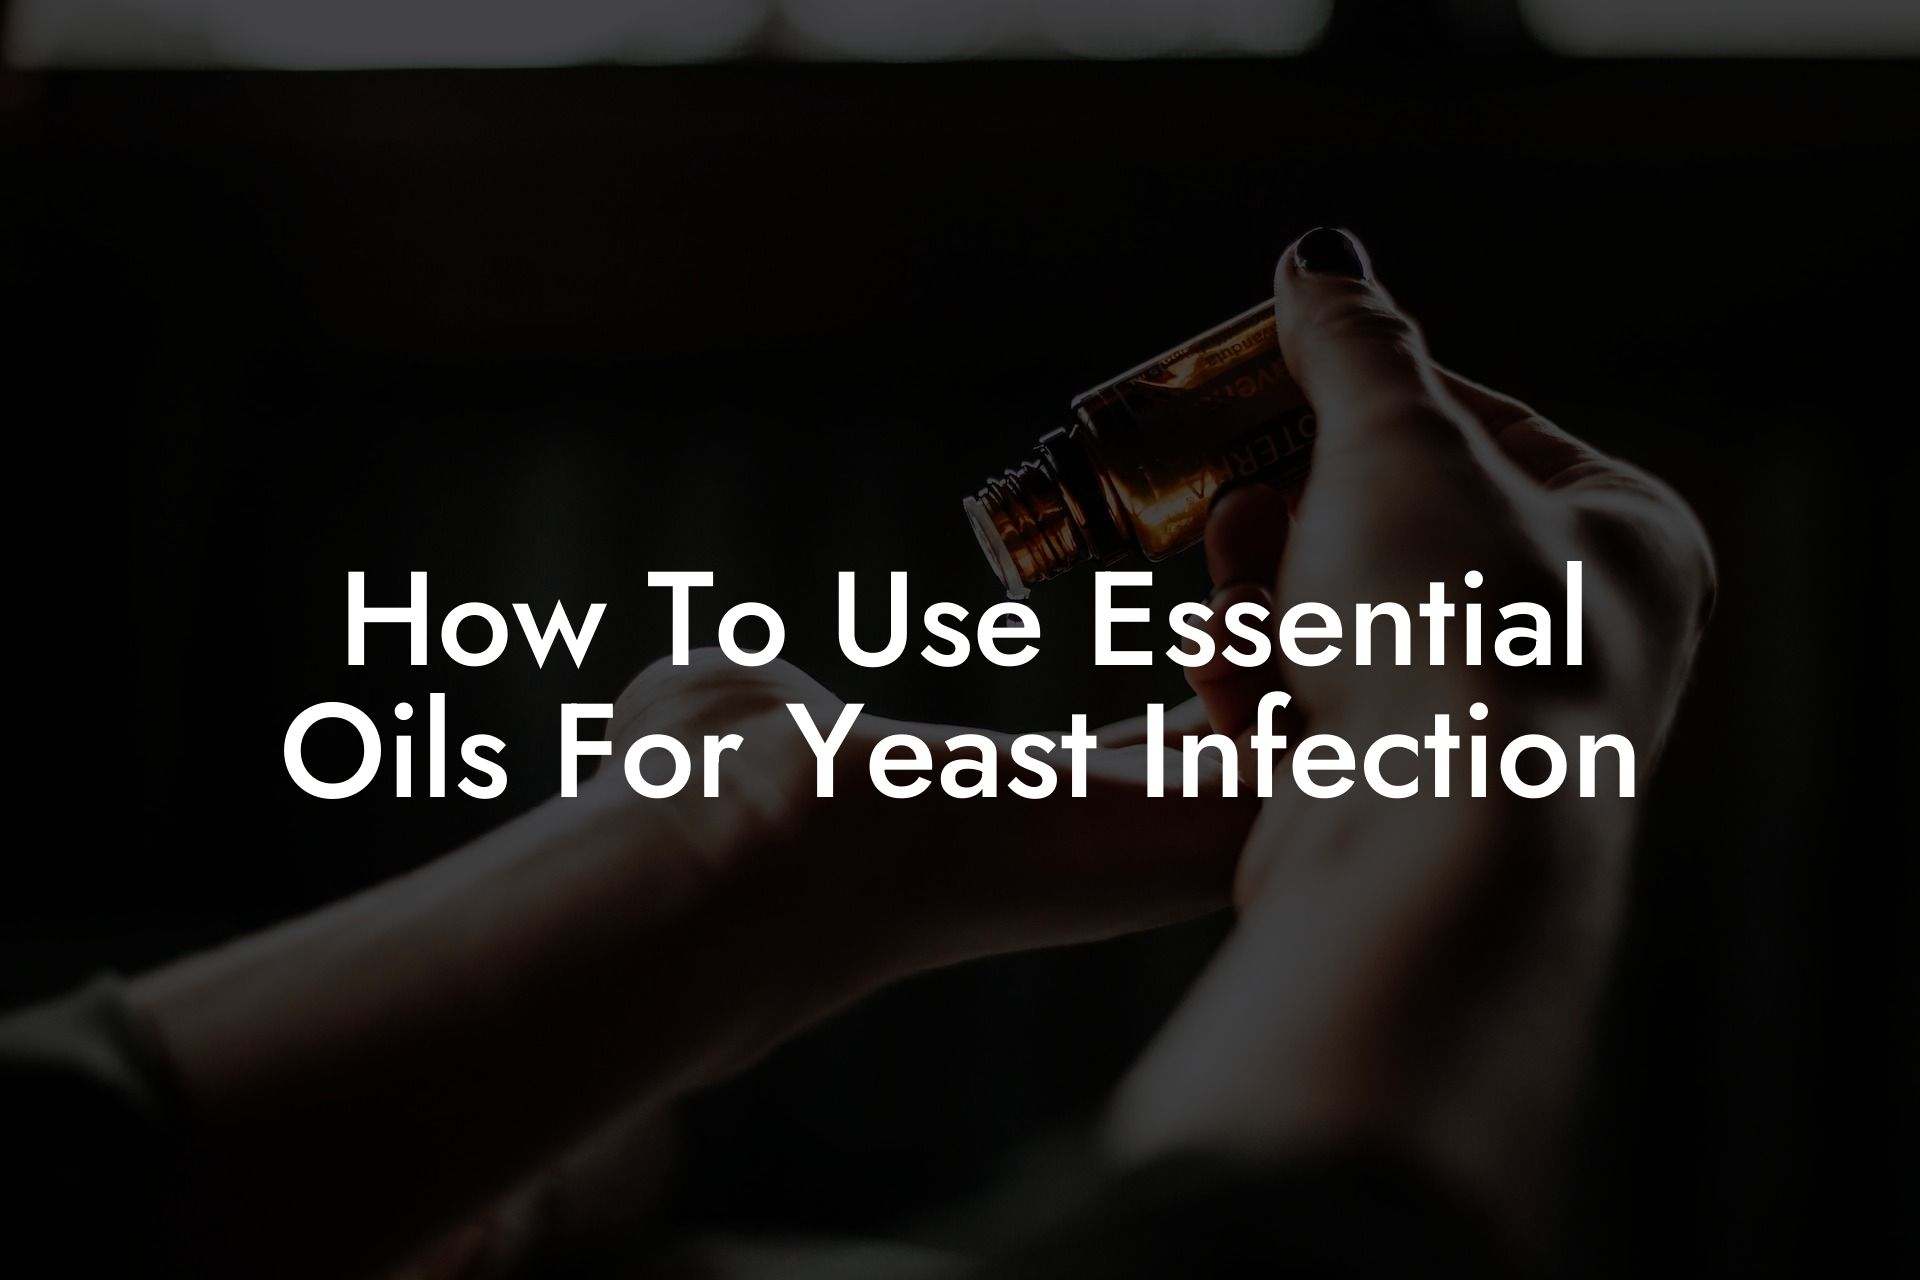 How To Use Essential Oils For Yeast Infection